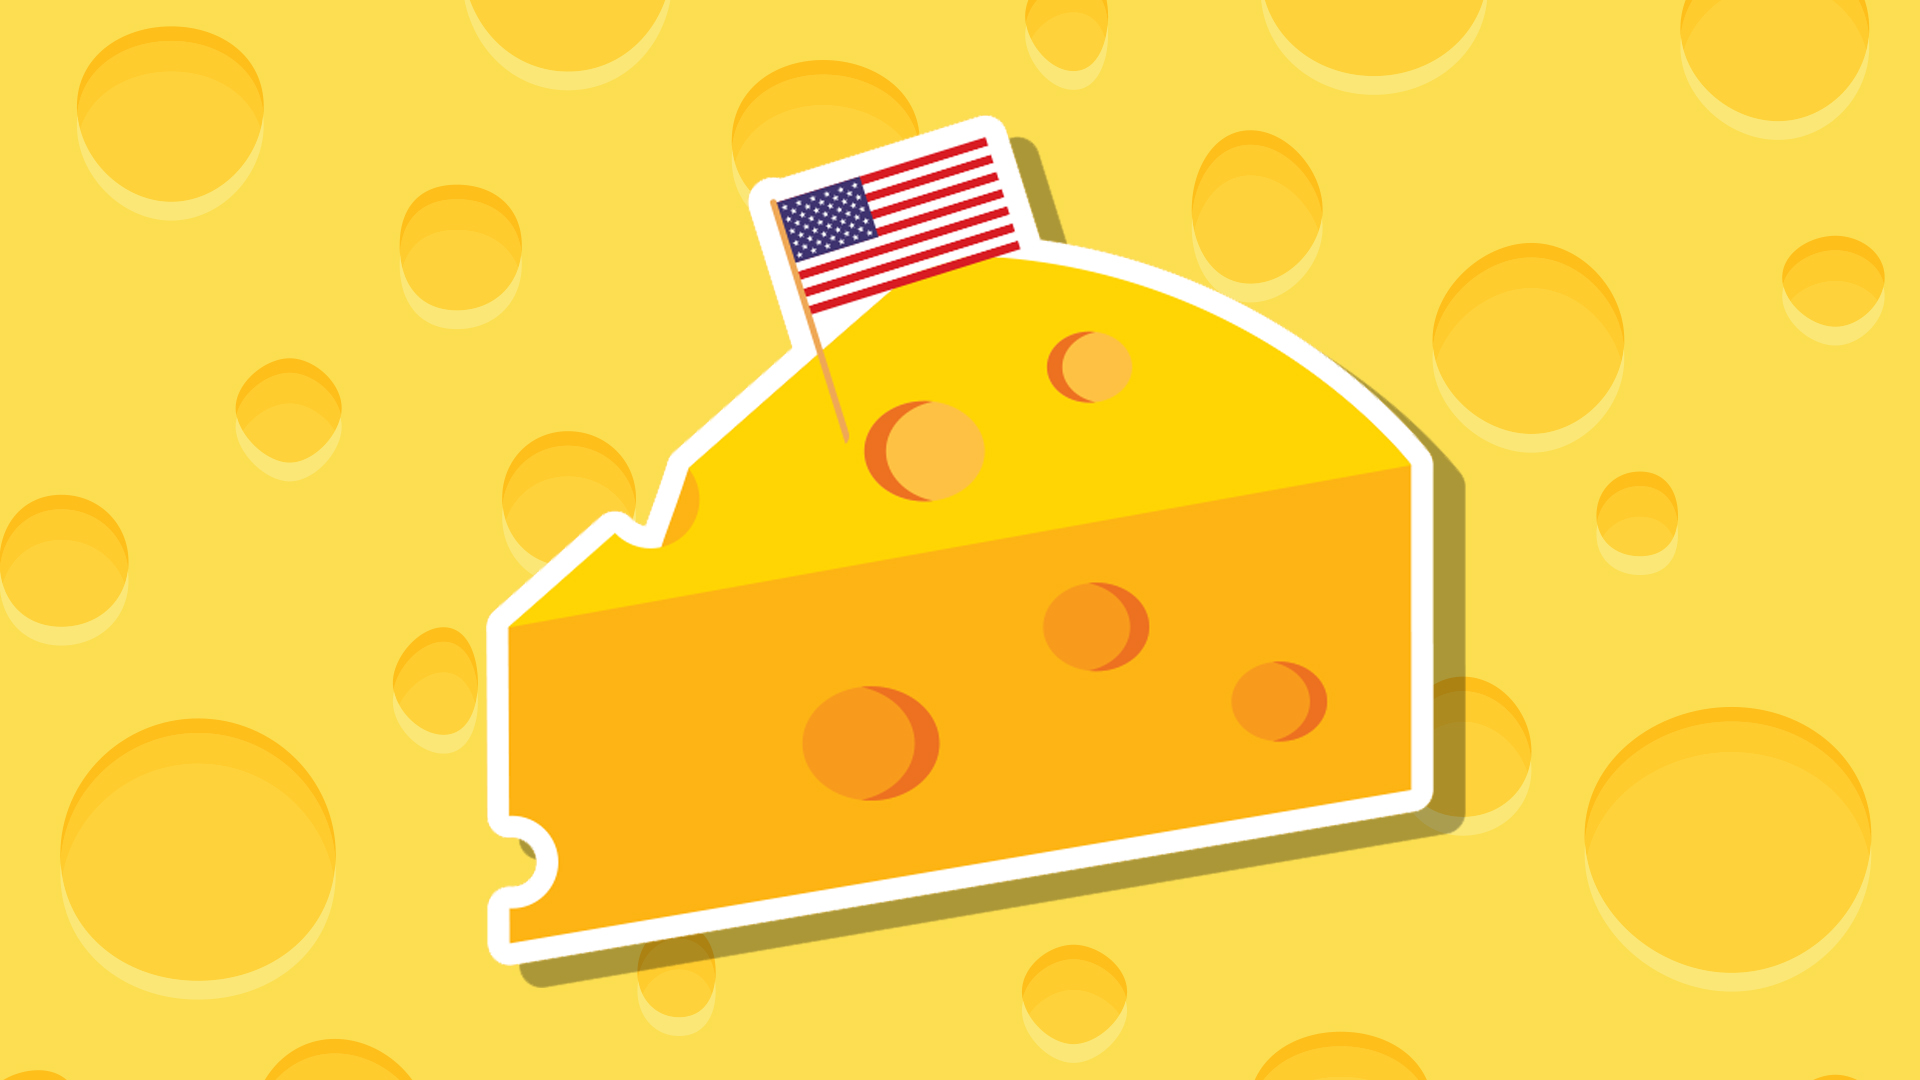 A wedge of cheese with the USA flag stuck on top